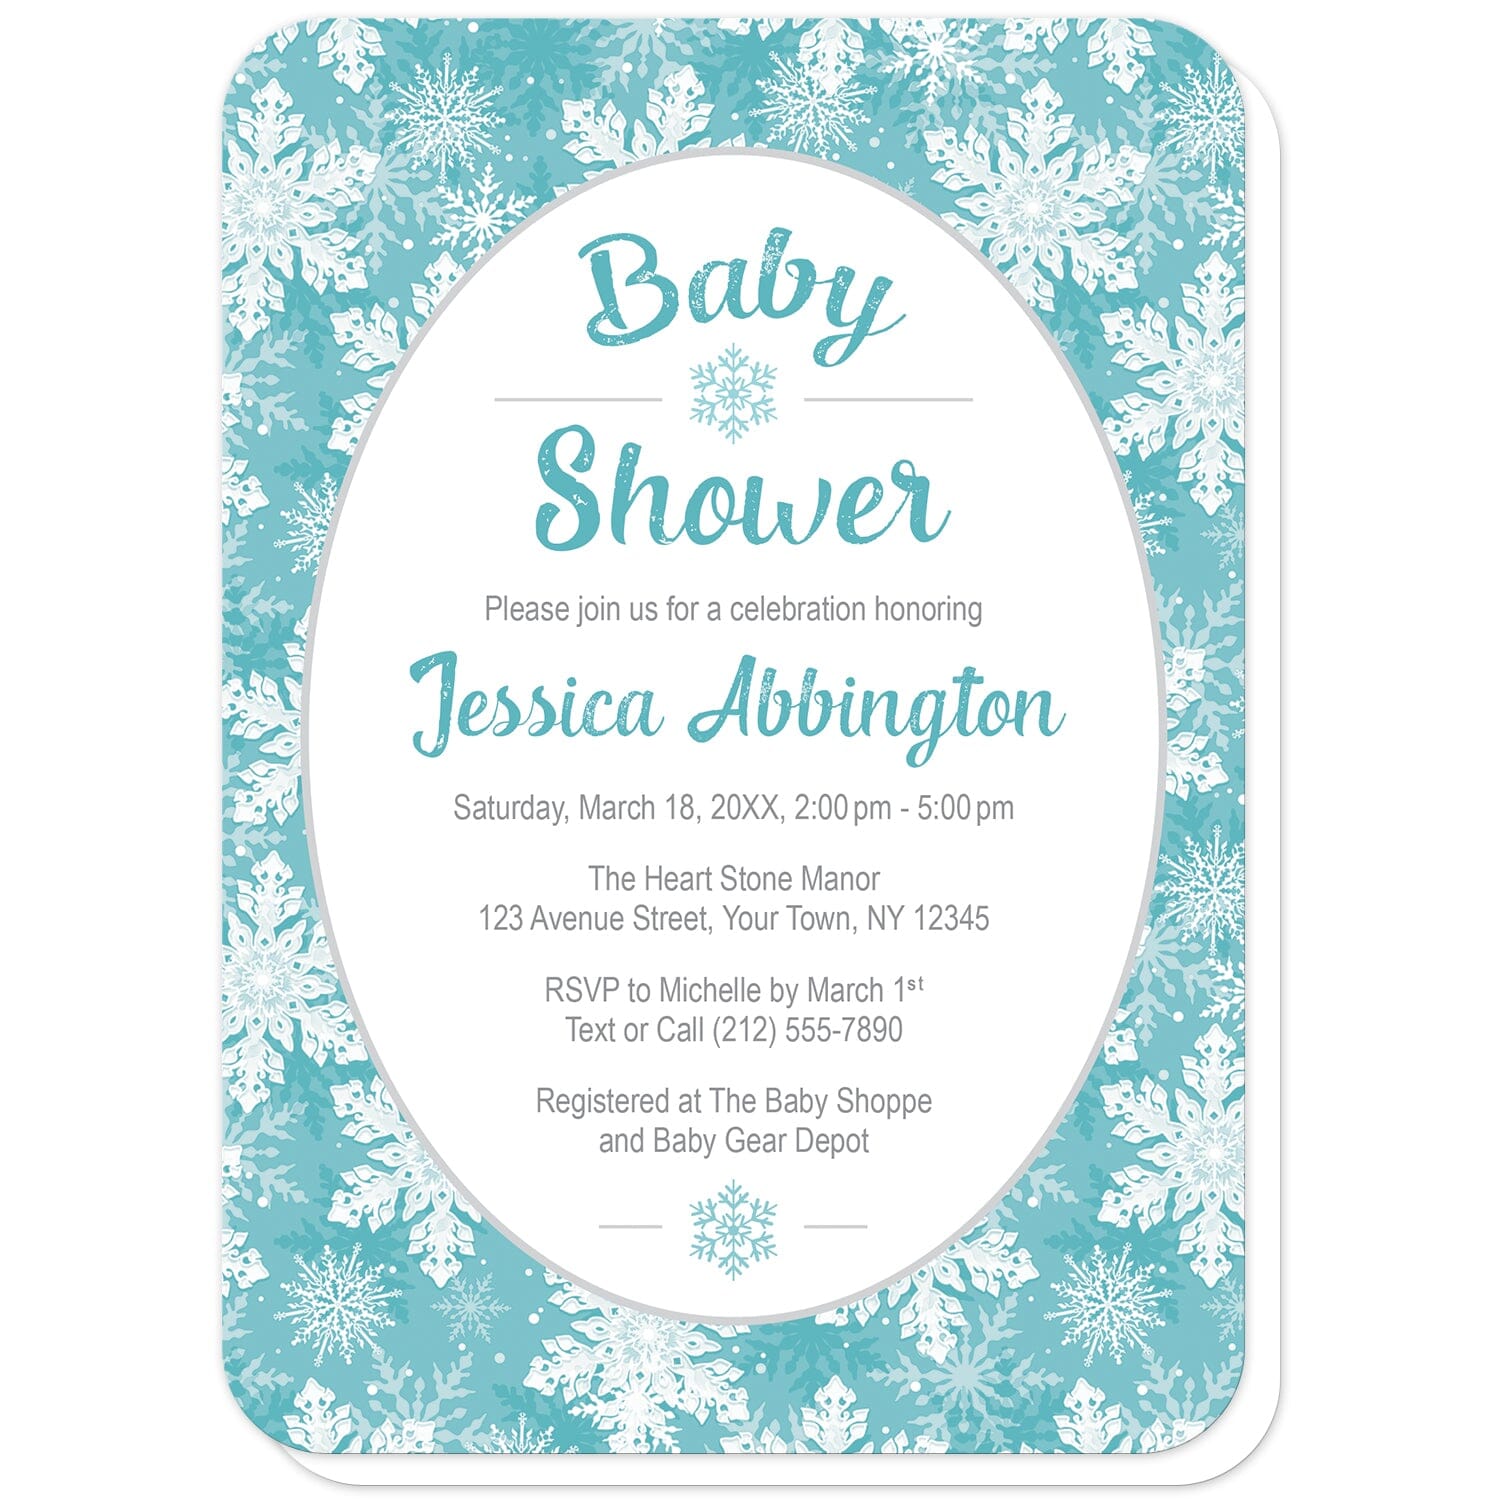 Teal Snowflake Baby Shower Invitations (with rounded corners) at Artistically Invited. Beautifully ornate teal snowflake baby shower invitations designed with your personalized baby shower details custom printed in teal and gray in a white oval frame design over a pretty teal, turquoise, and white snowflake pattern background.